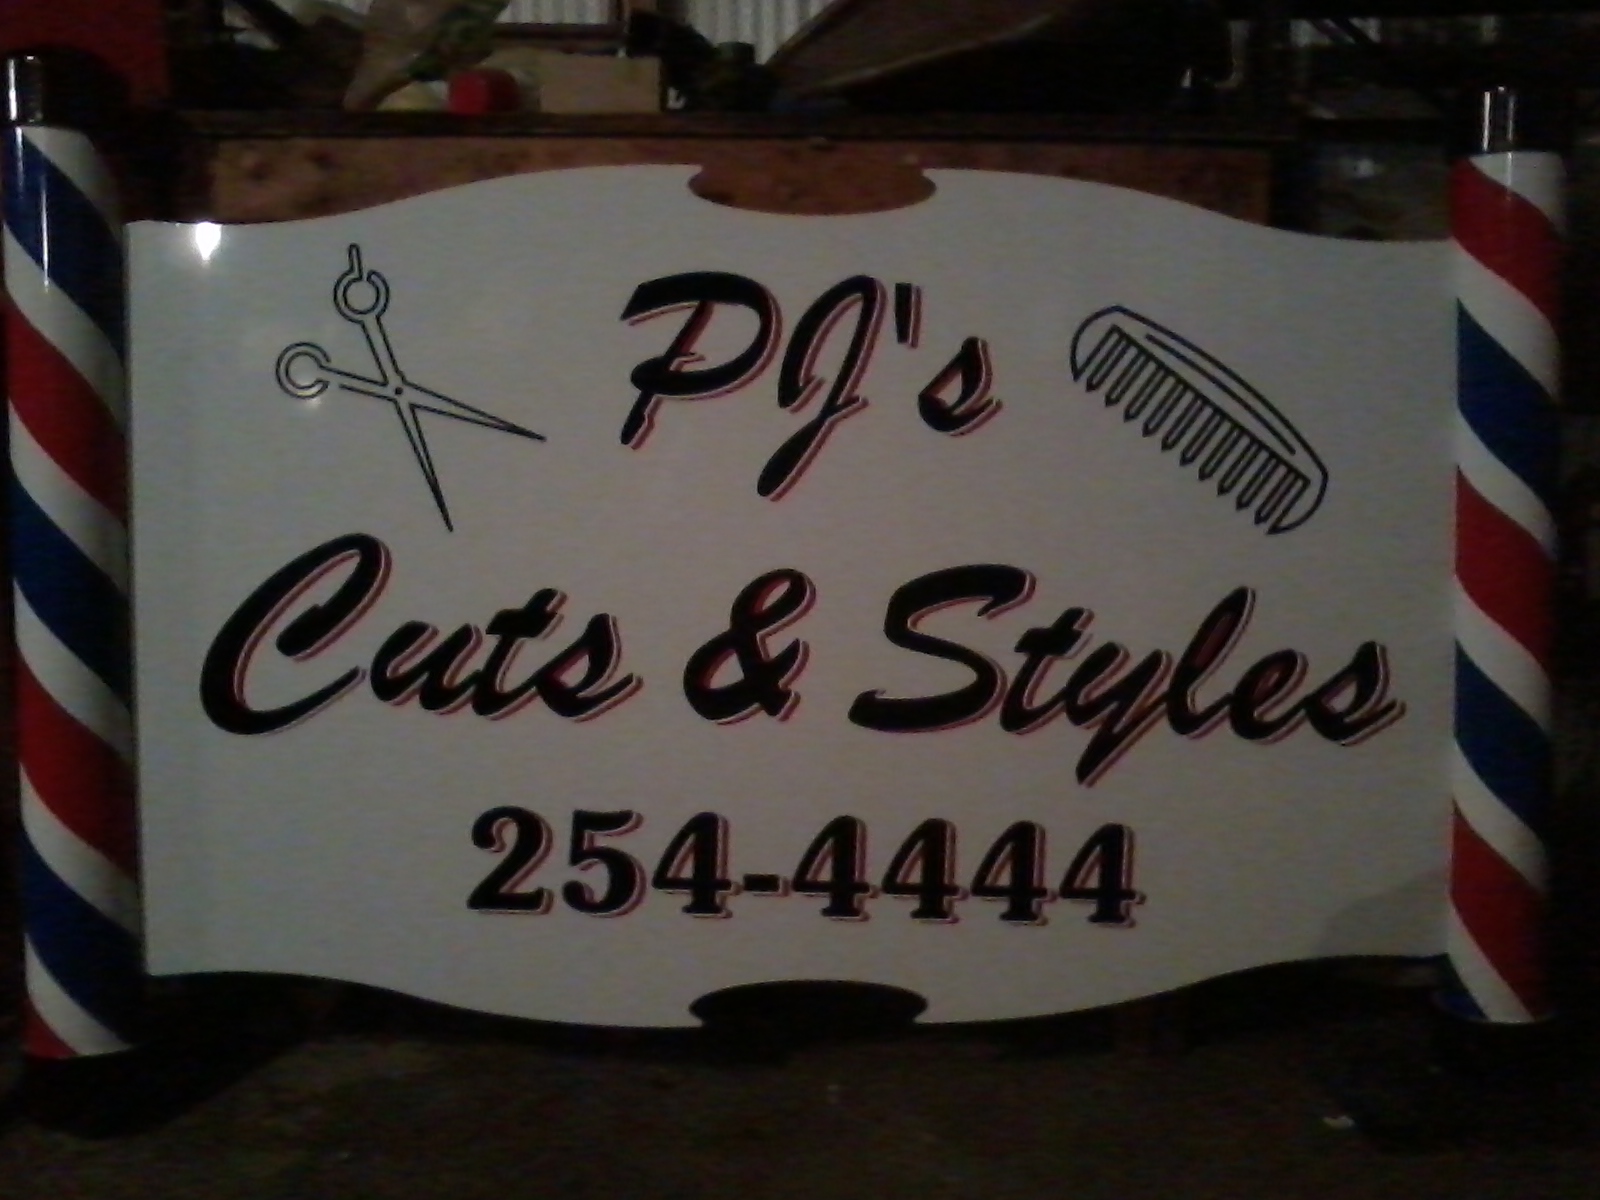 P J's Cuts & Styles 201 N Central Ave, Roxana Illinois 62084